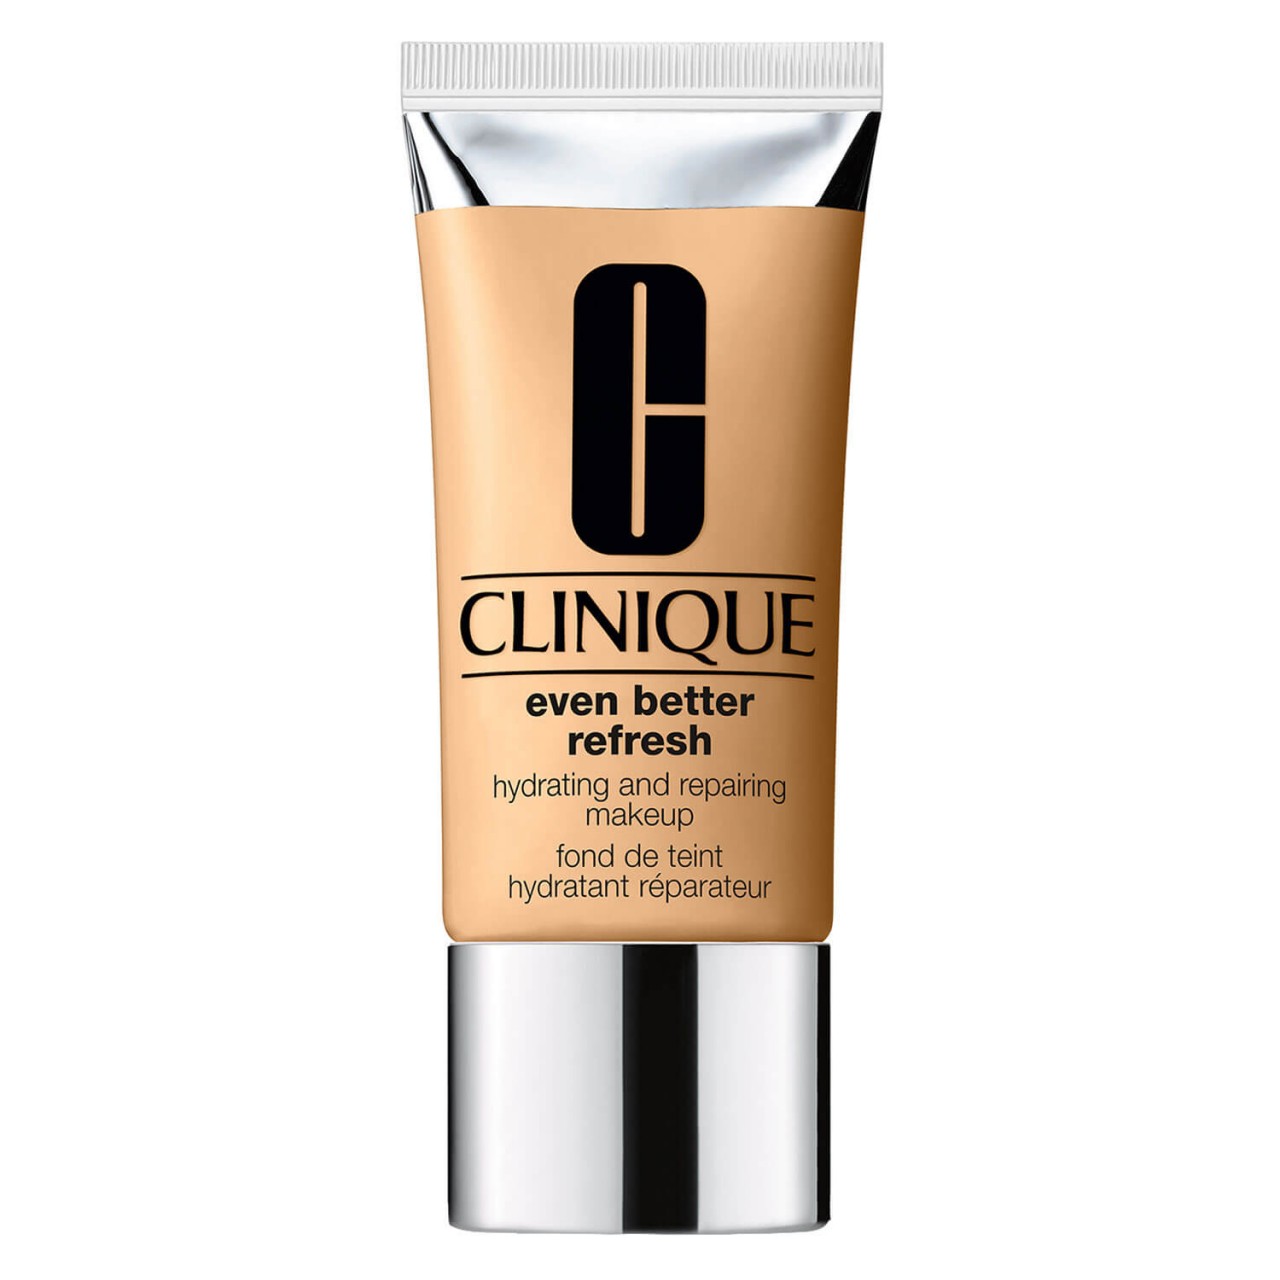 Clinique - Even Better Refresh™ Hydrating and Repairing Makeup - WN 46 Golden Neutral